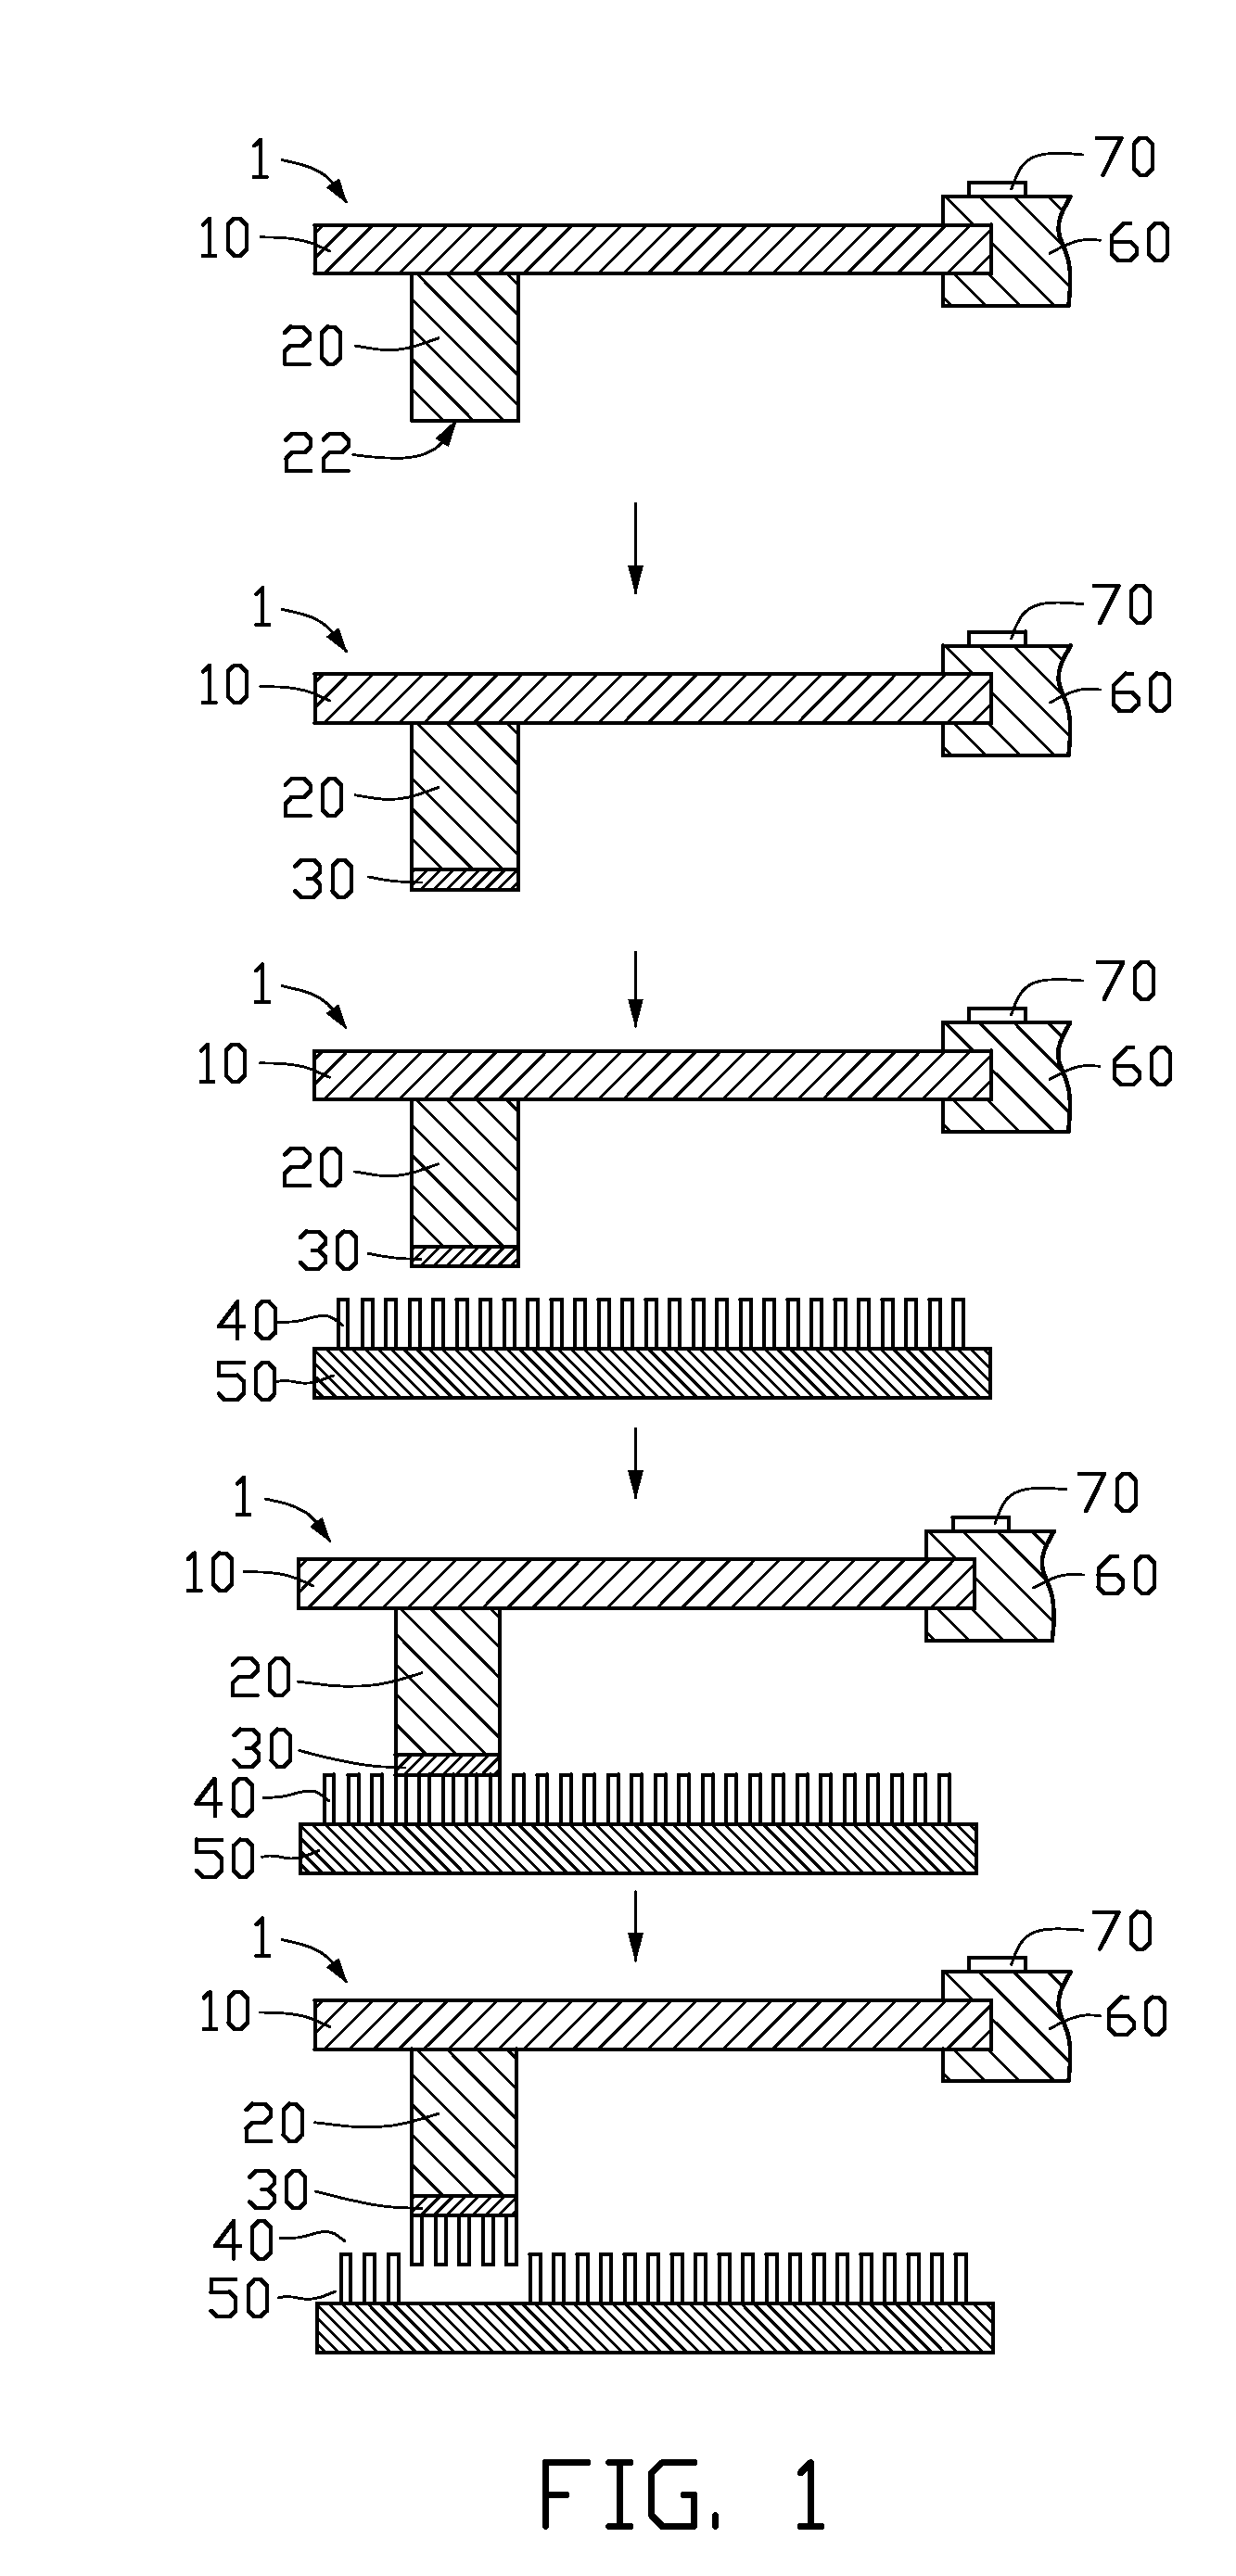 Method for measuring bonding force between substrate and carbon nanotube array formed thereon